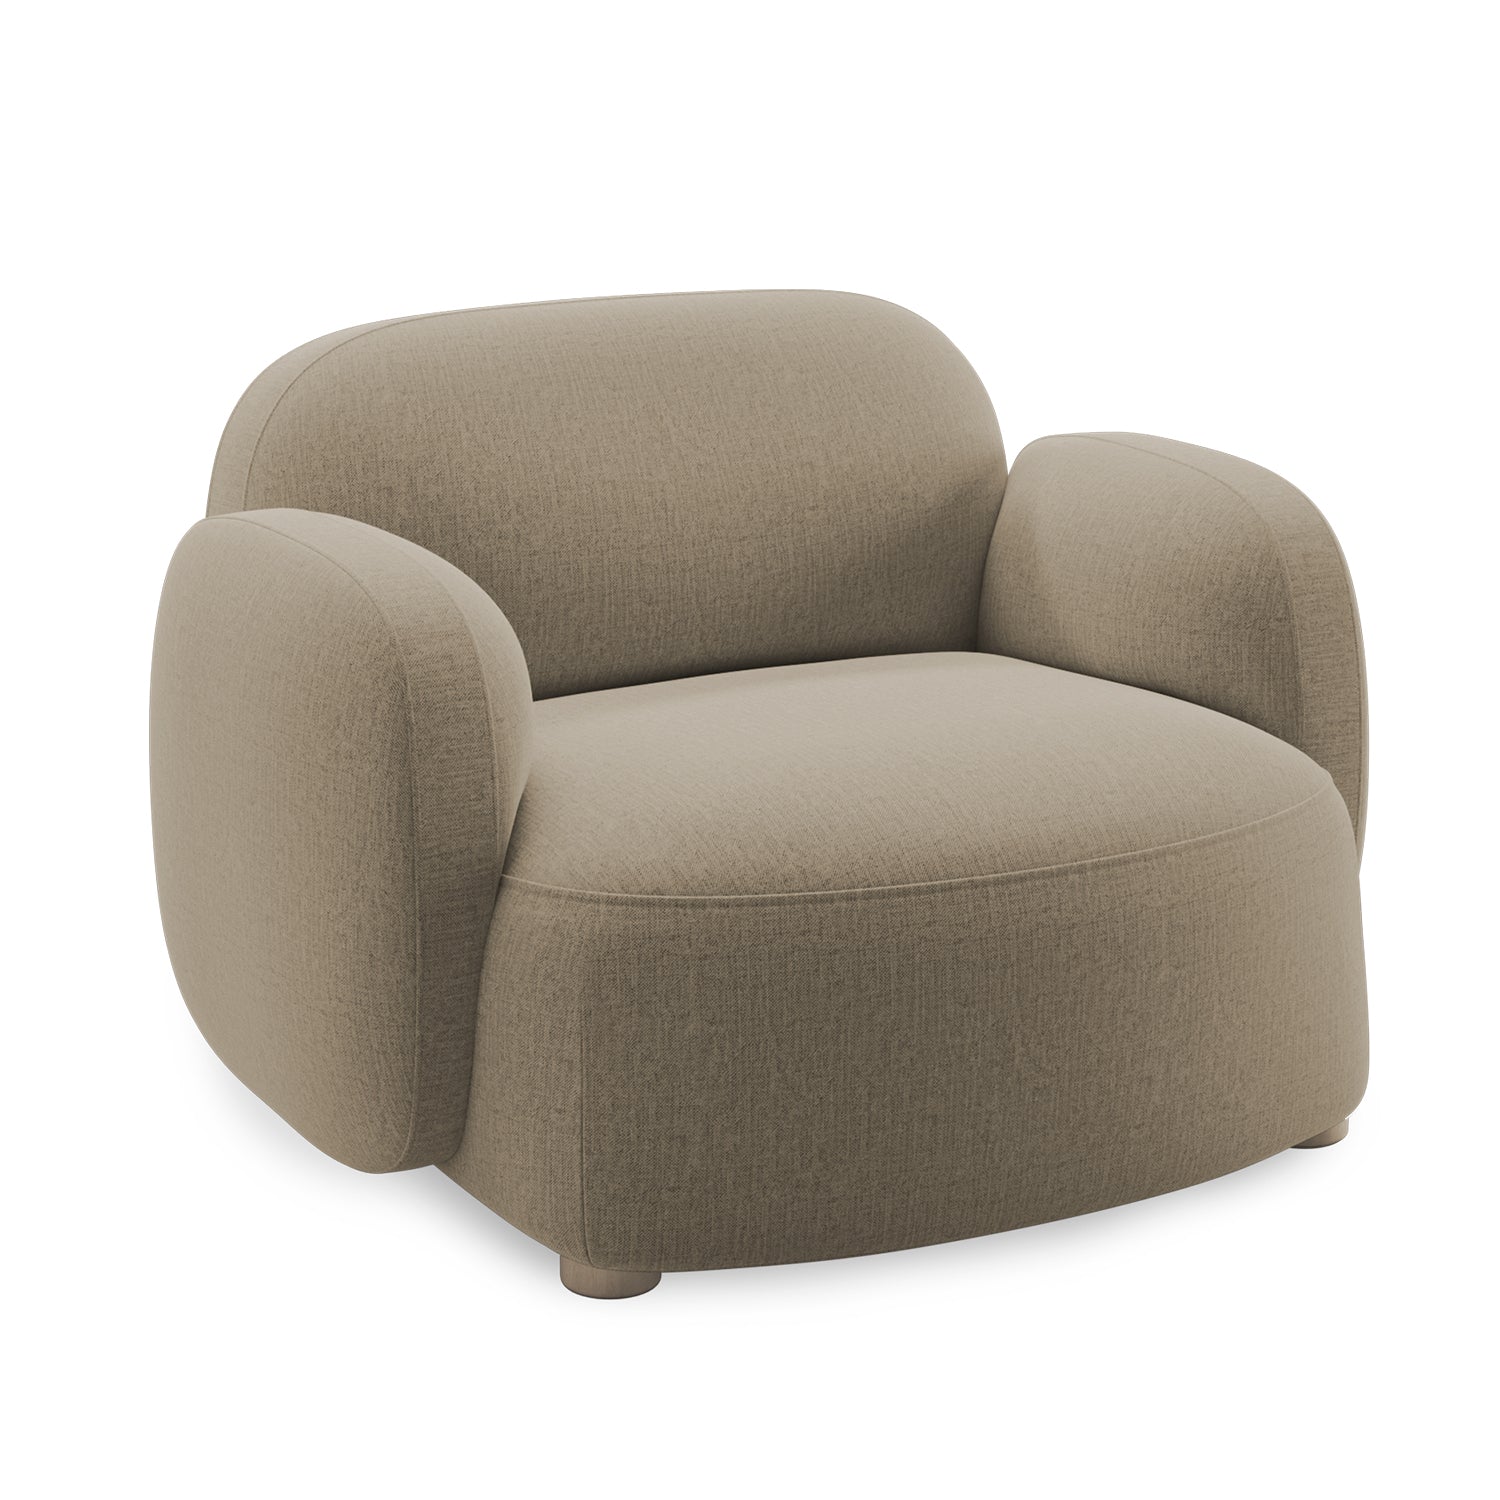 Northern Gem Lounge Chair with Armrest in  Brusvik 65